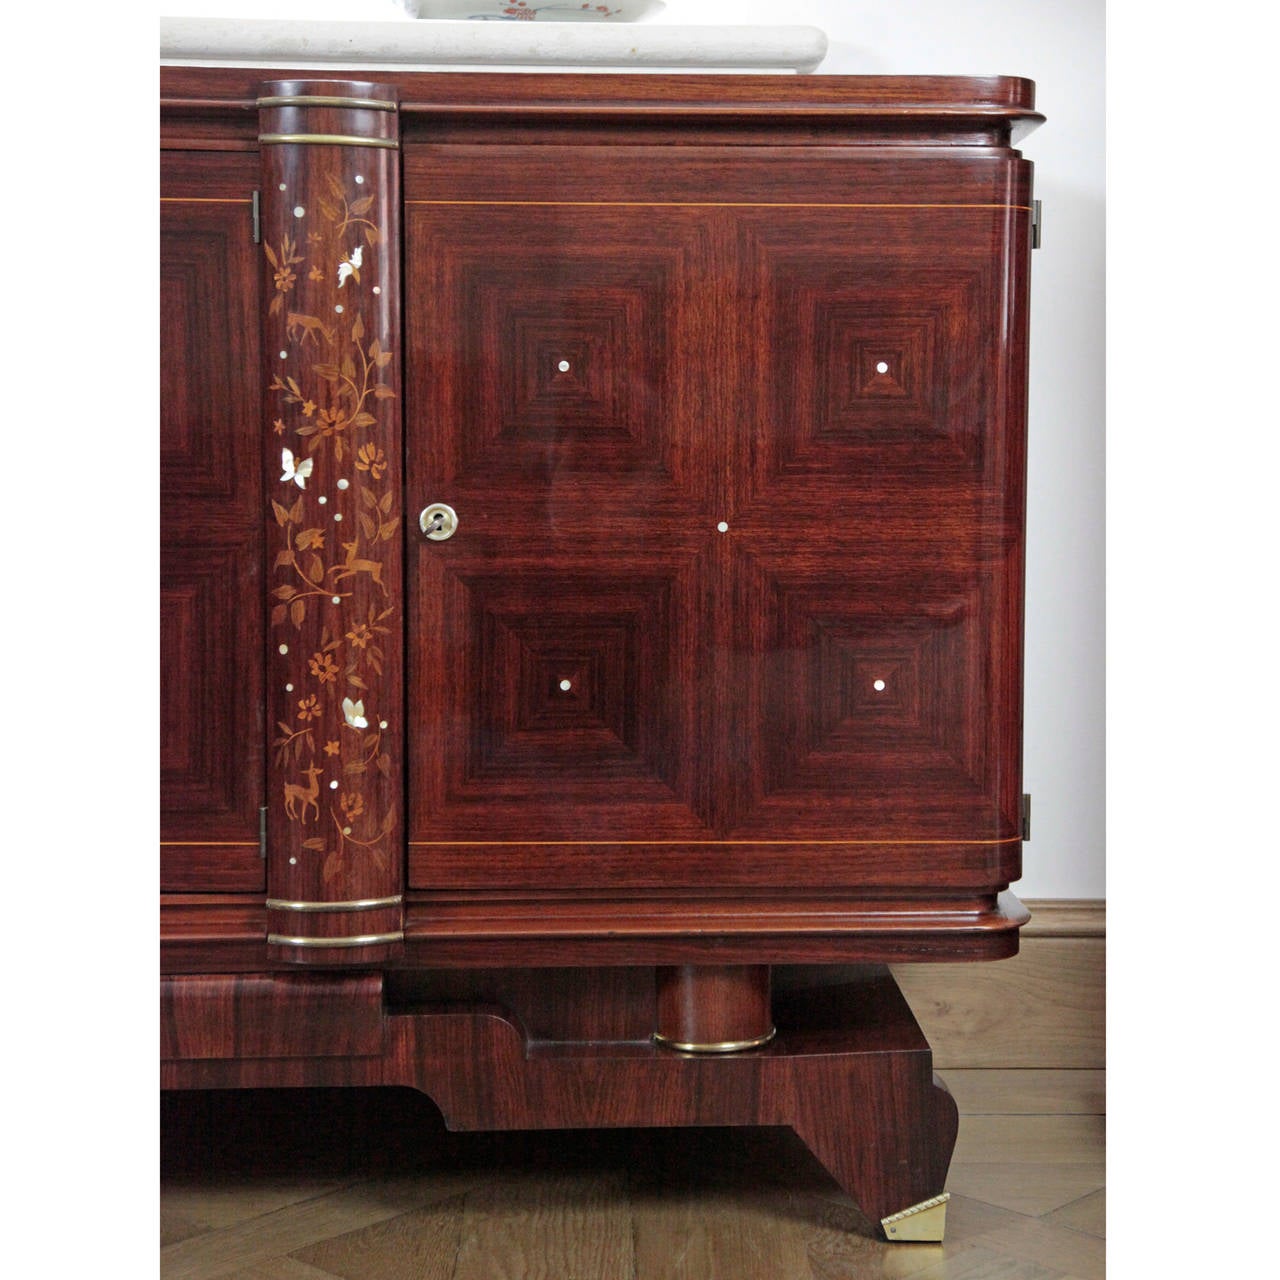 Wonderful French Art Deco Sideboard in Style of Leleu from the 1920s.
The very unusual rosewood sideboard stands on four feet and has a unique base frame with brass details. The cross rectangular long corpus has three compartments, the side parts